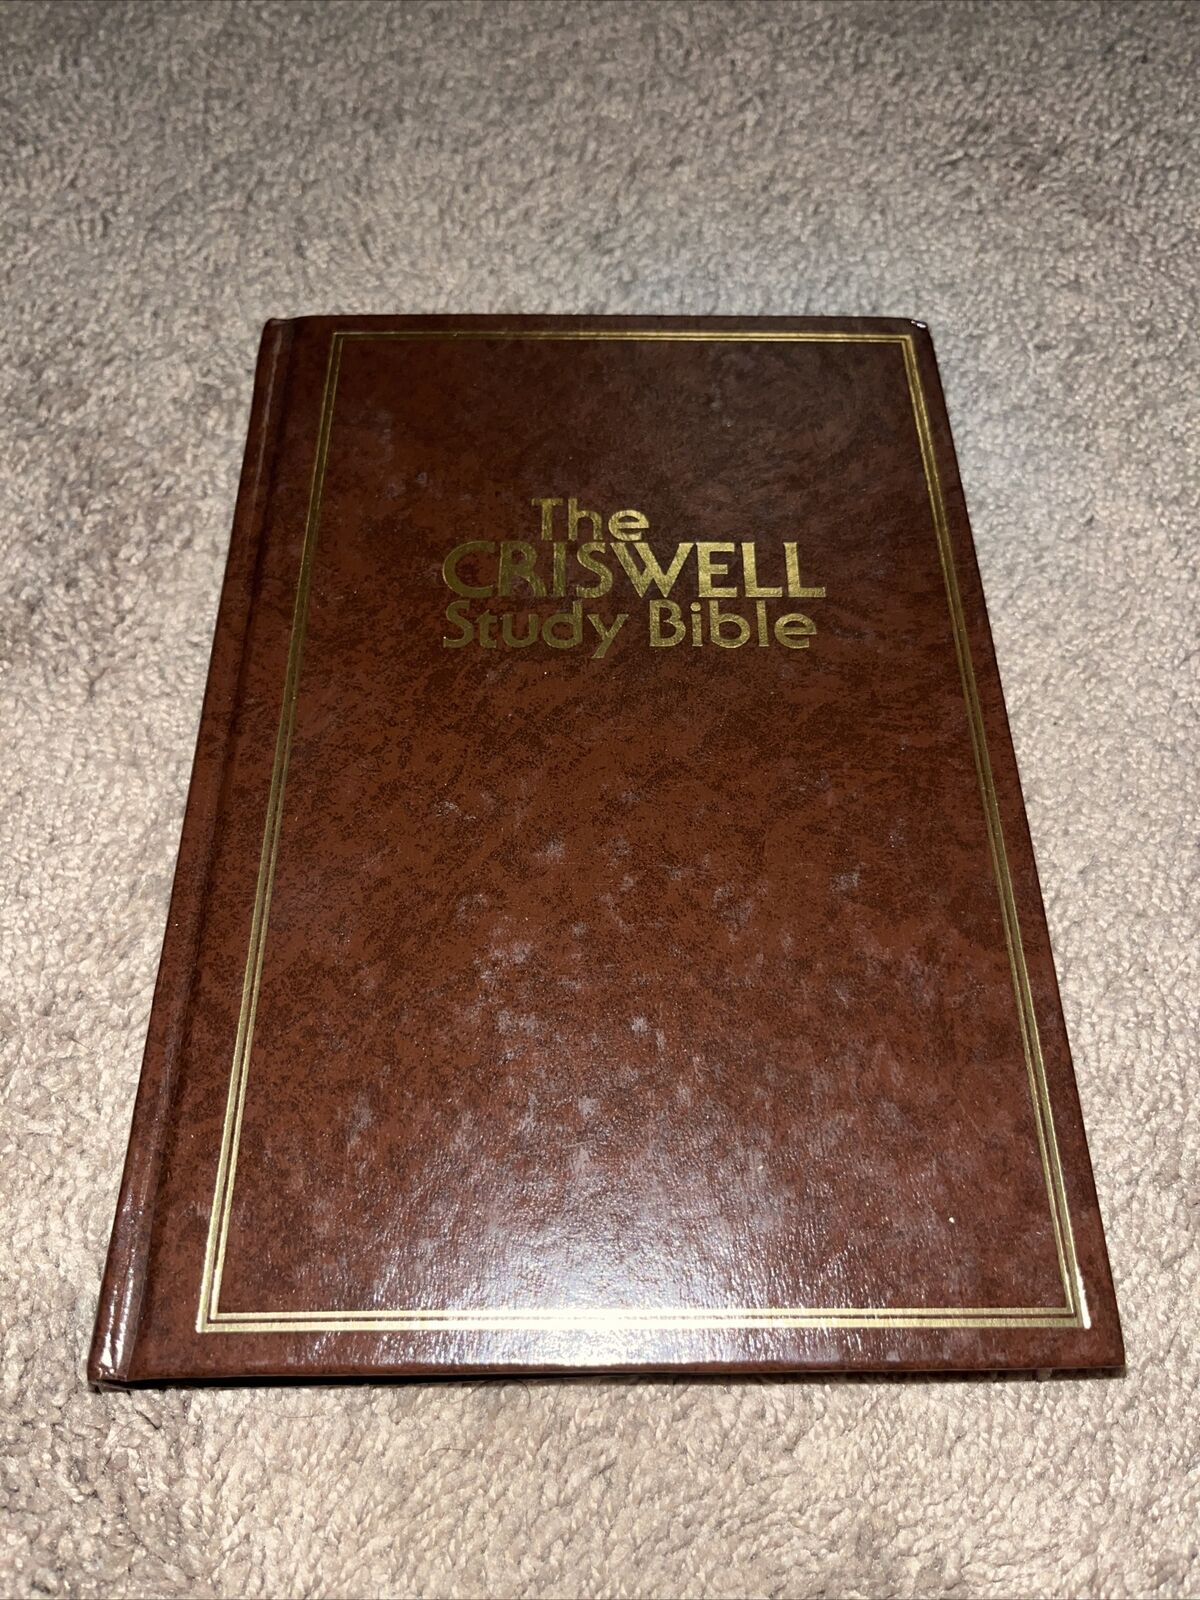 The Criswell Study Bible KJV 1979 Old Time Gospel Hour Hardback W.A. Criswell